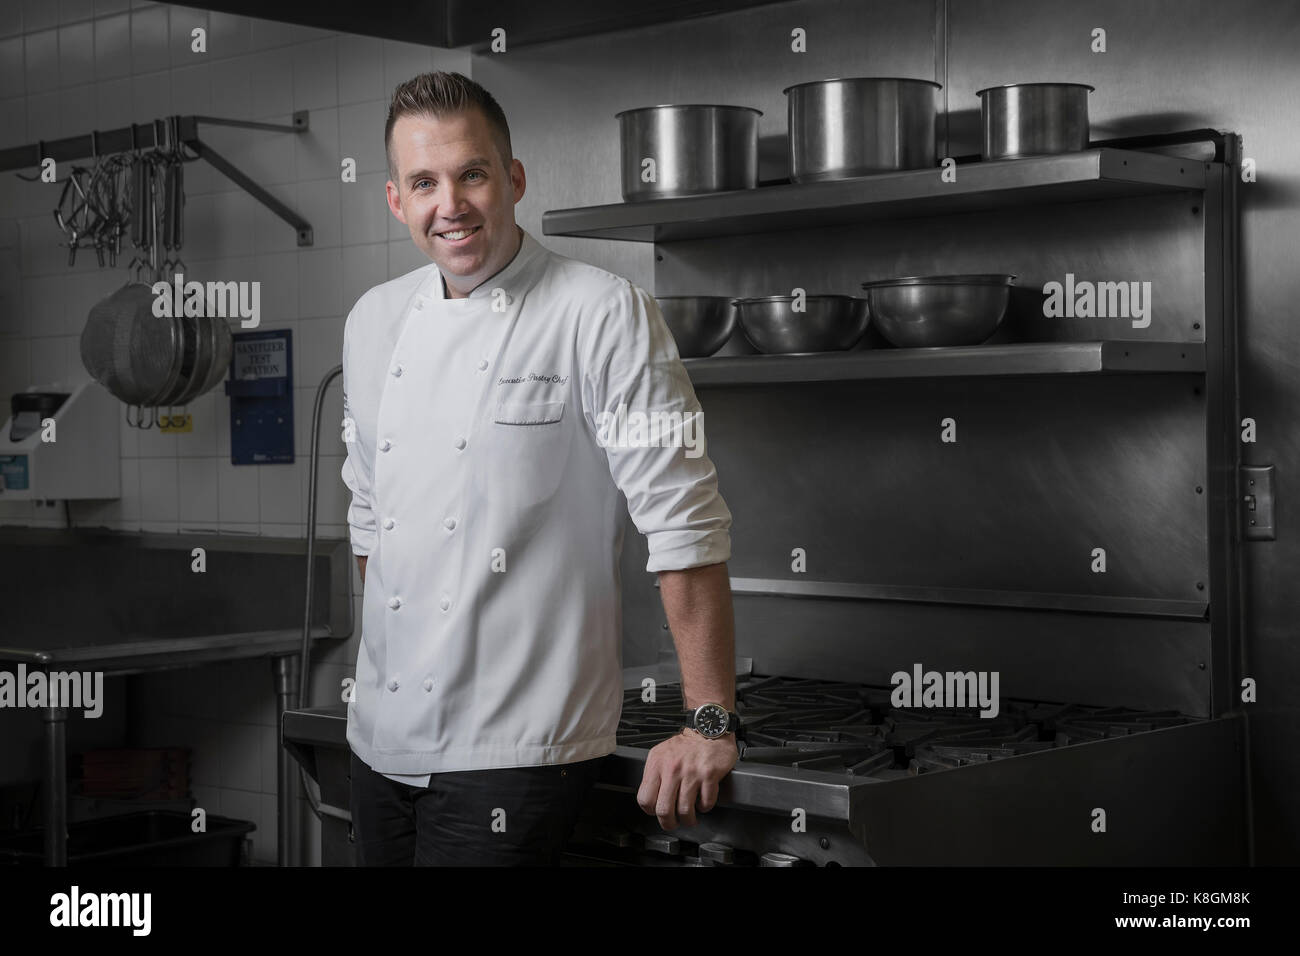 Portrait of happy pastry chef leaning against hob in kitchen Stock Photo